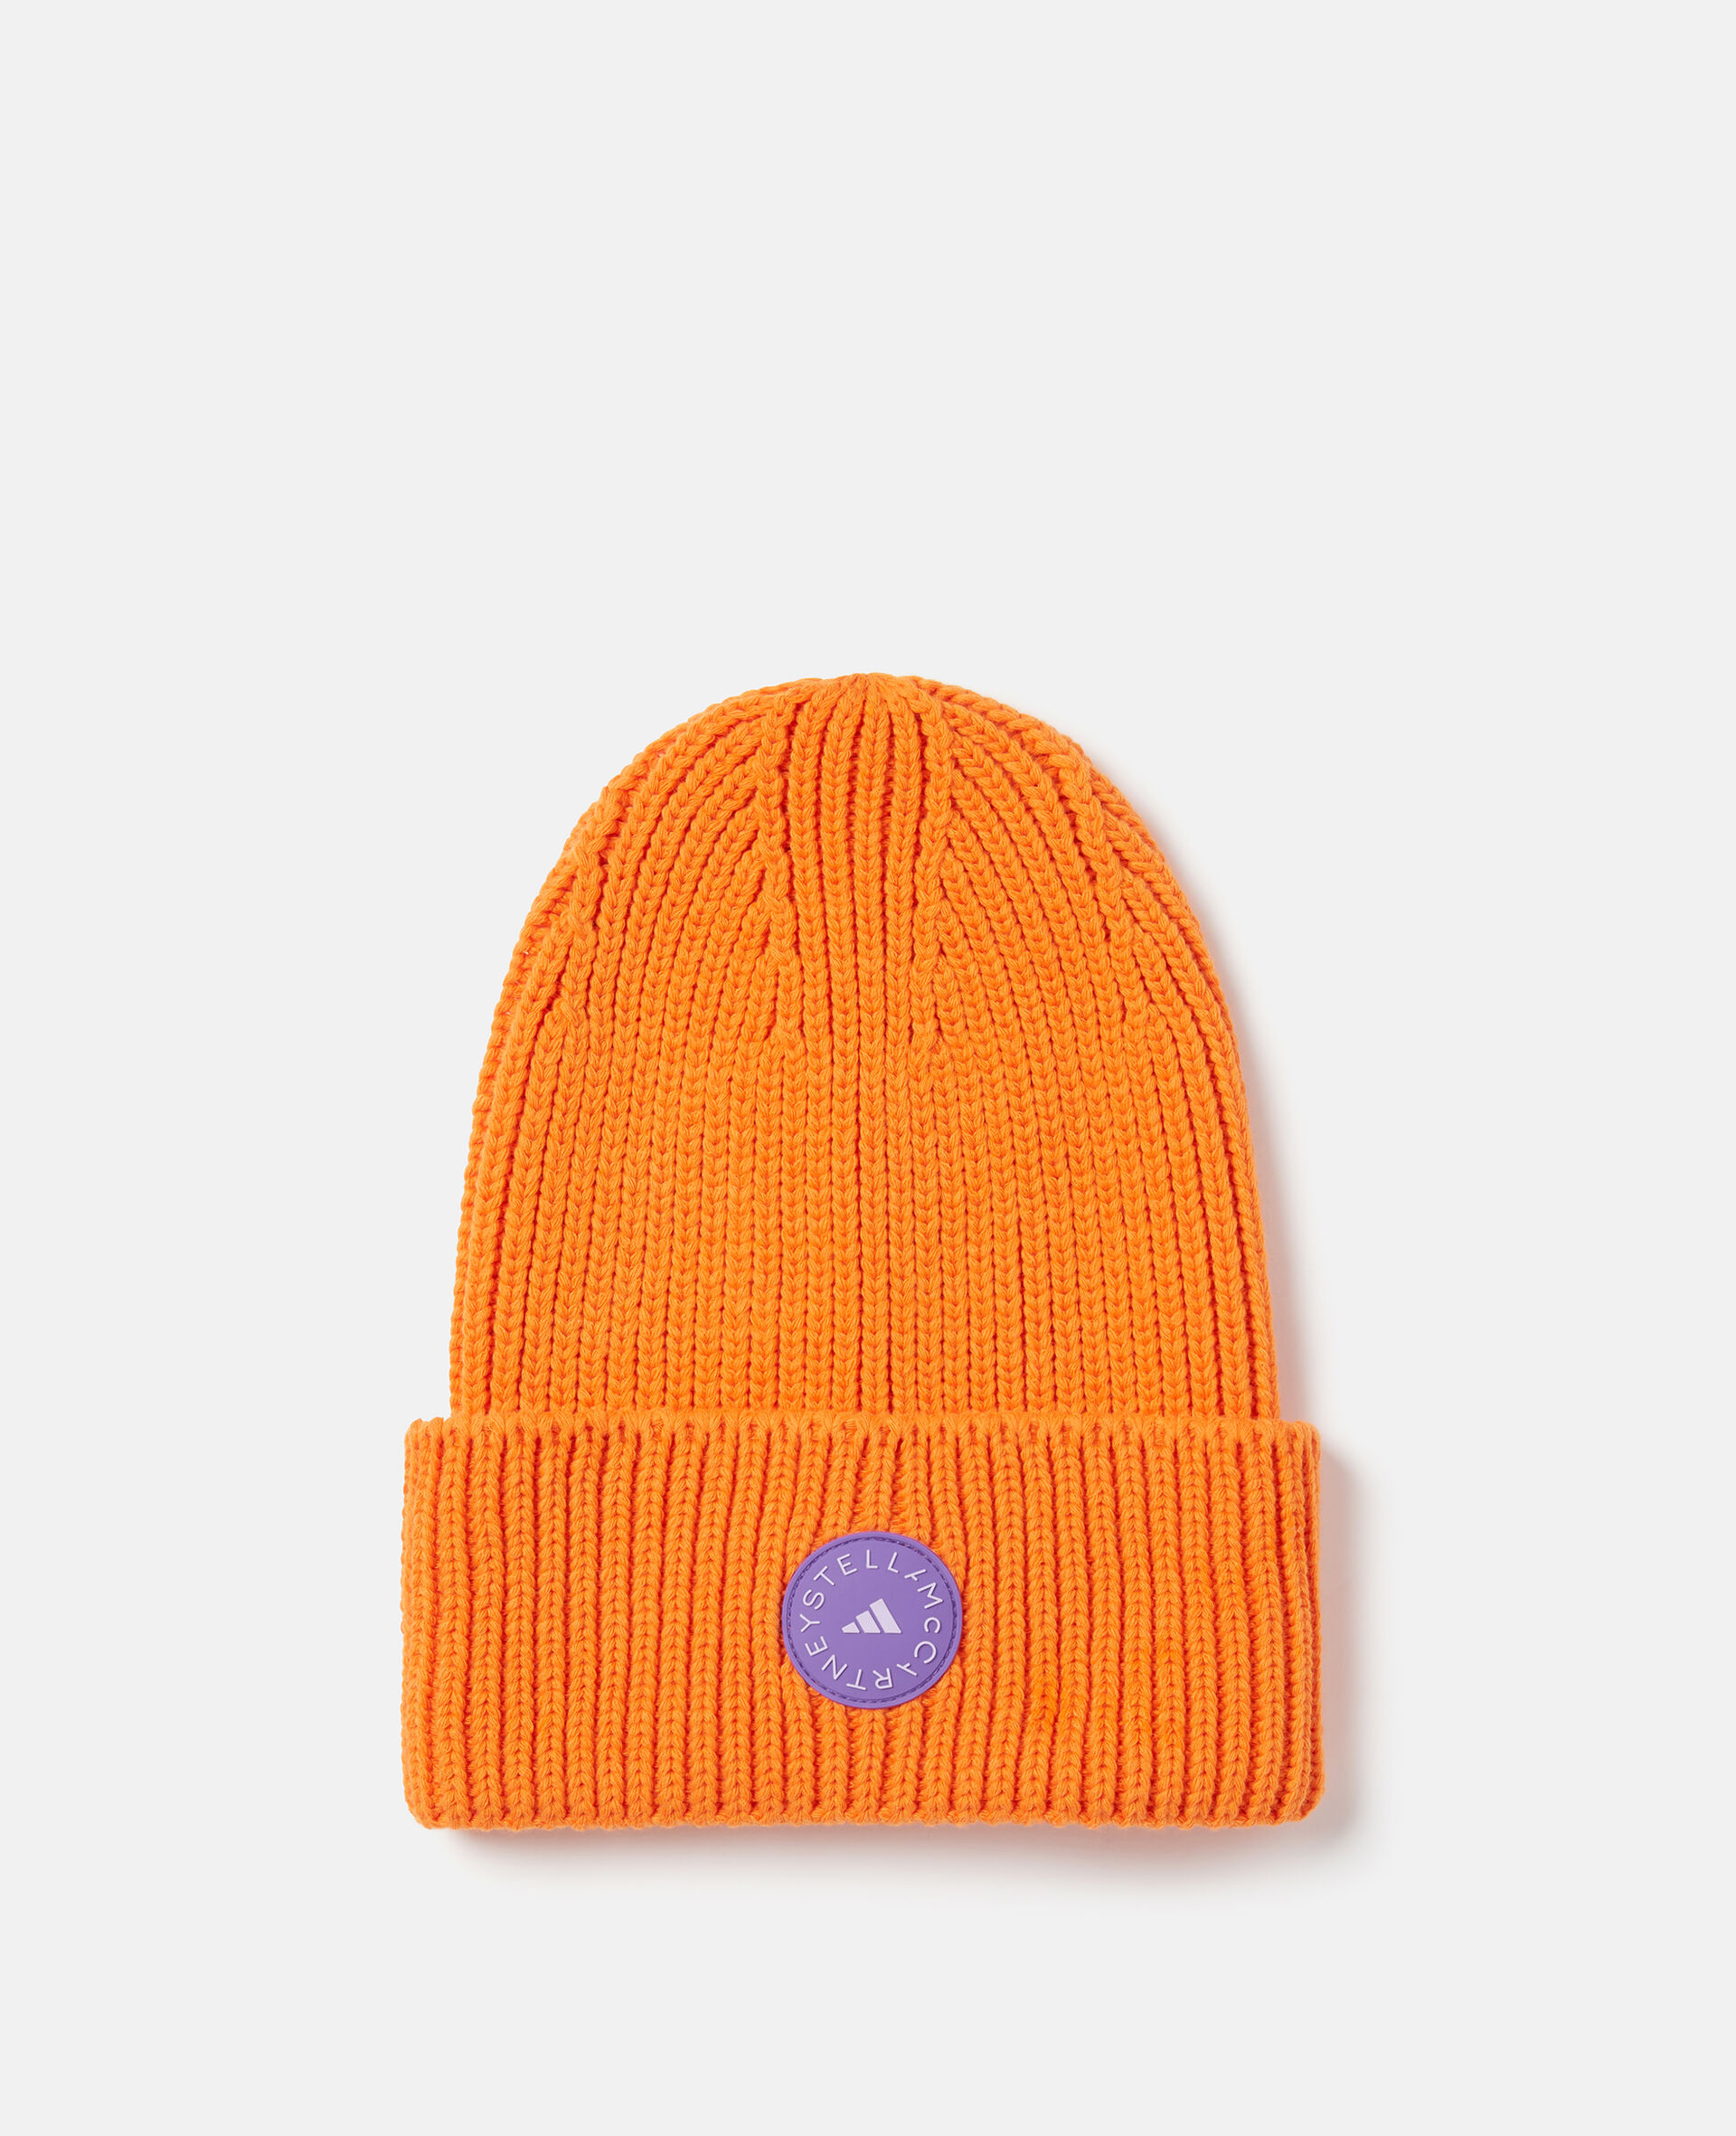 Beanie-Bunt-large image number 0